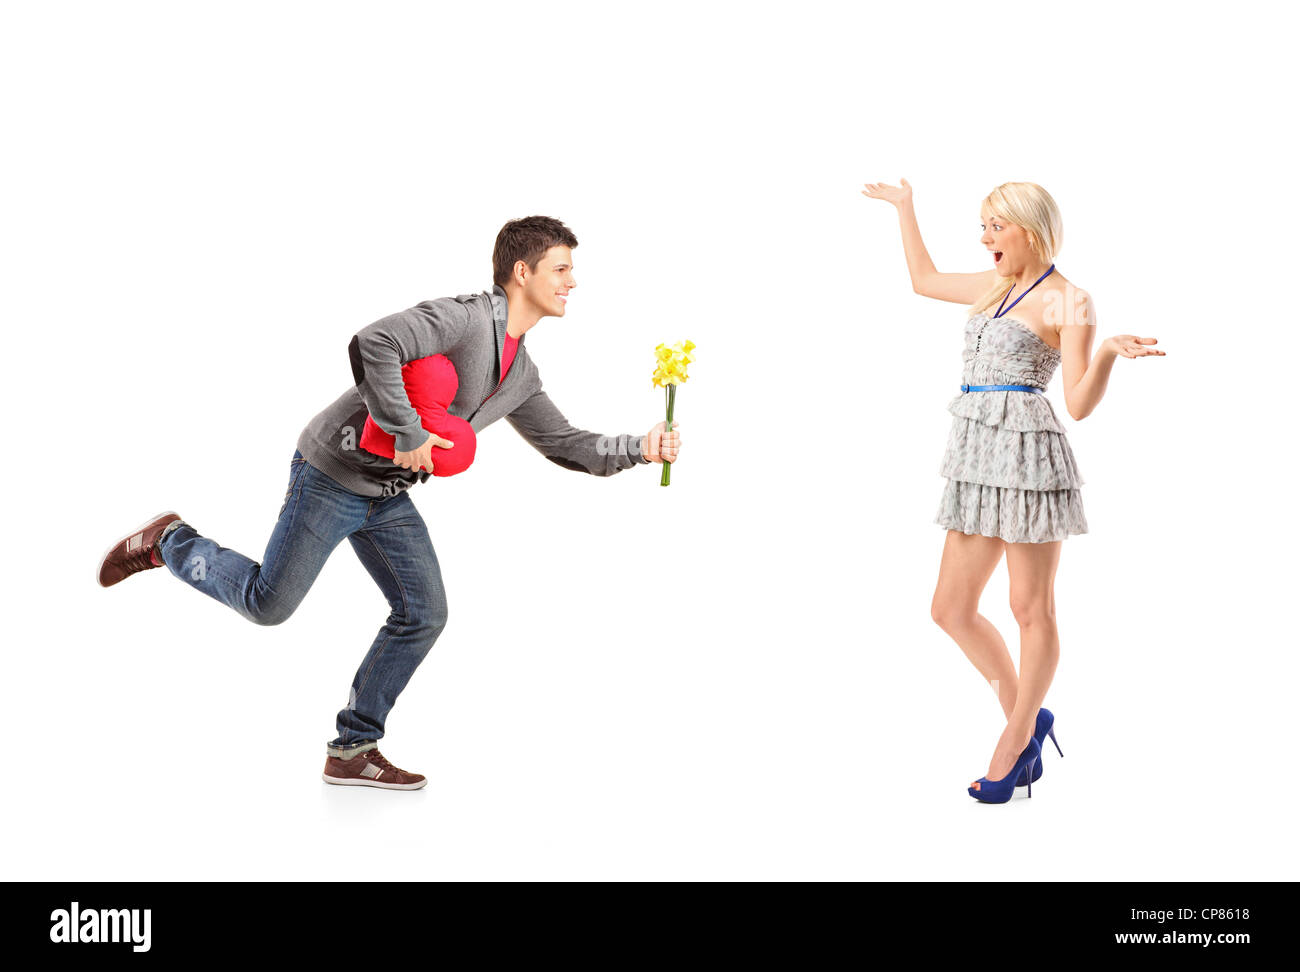 A boyfriend in love running with flowers and heart shape object towards his excited girlfriend isolated on white background Stock Photo